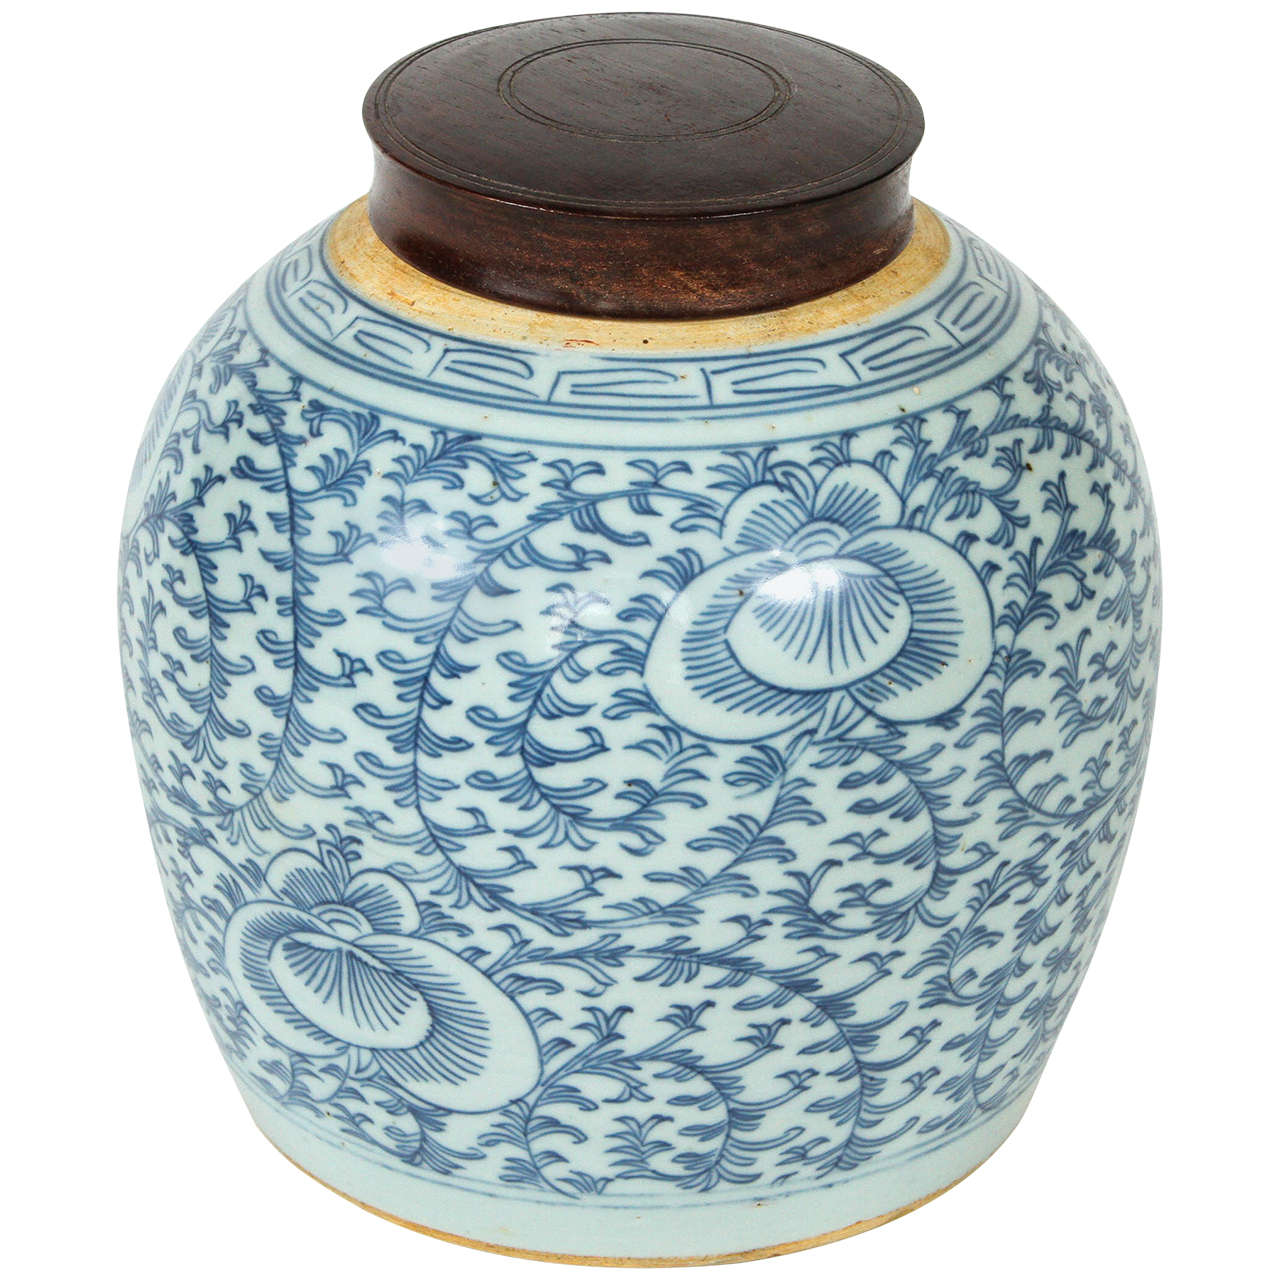 19th Century Chinese Blue and White Porcelain Ginger Jar with Wooden Top